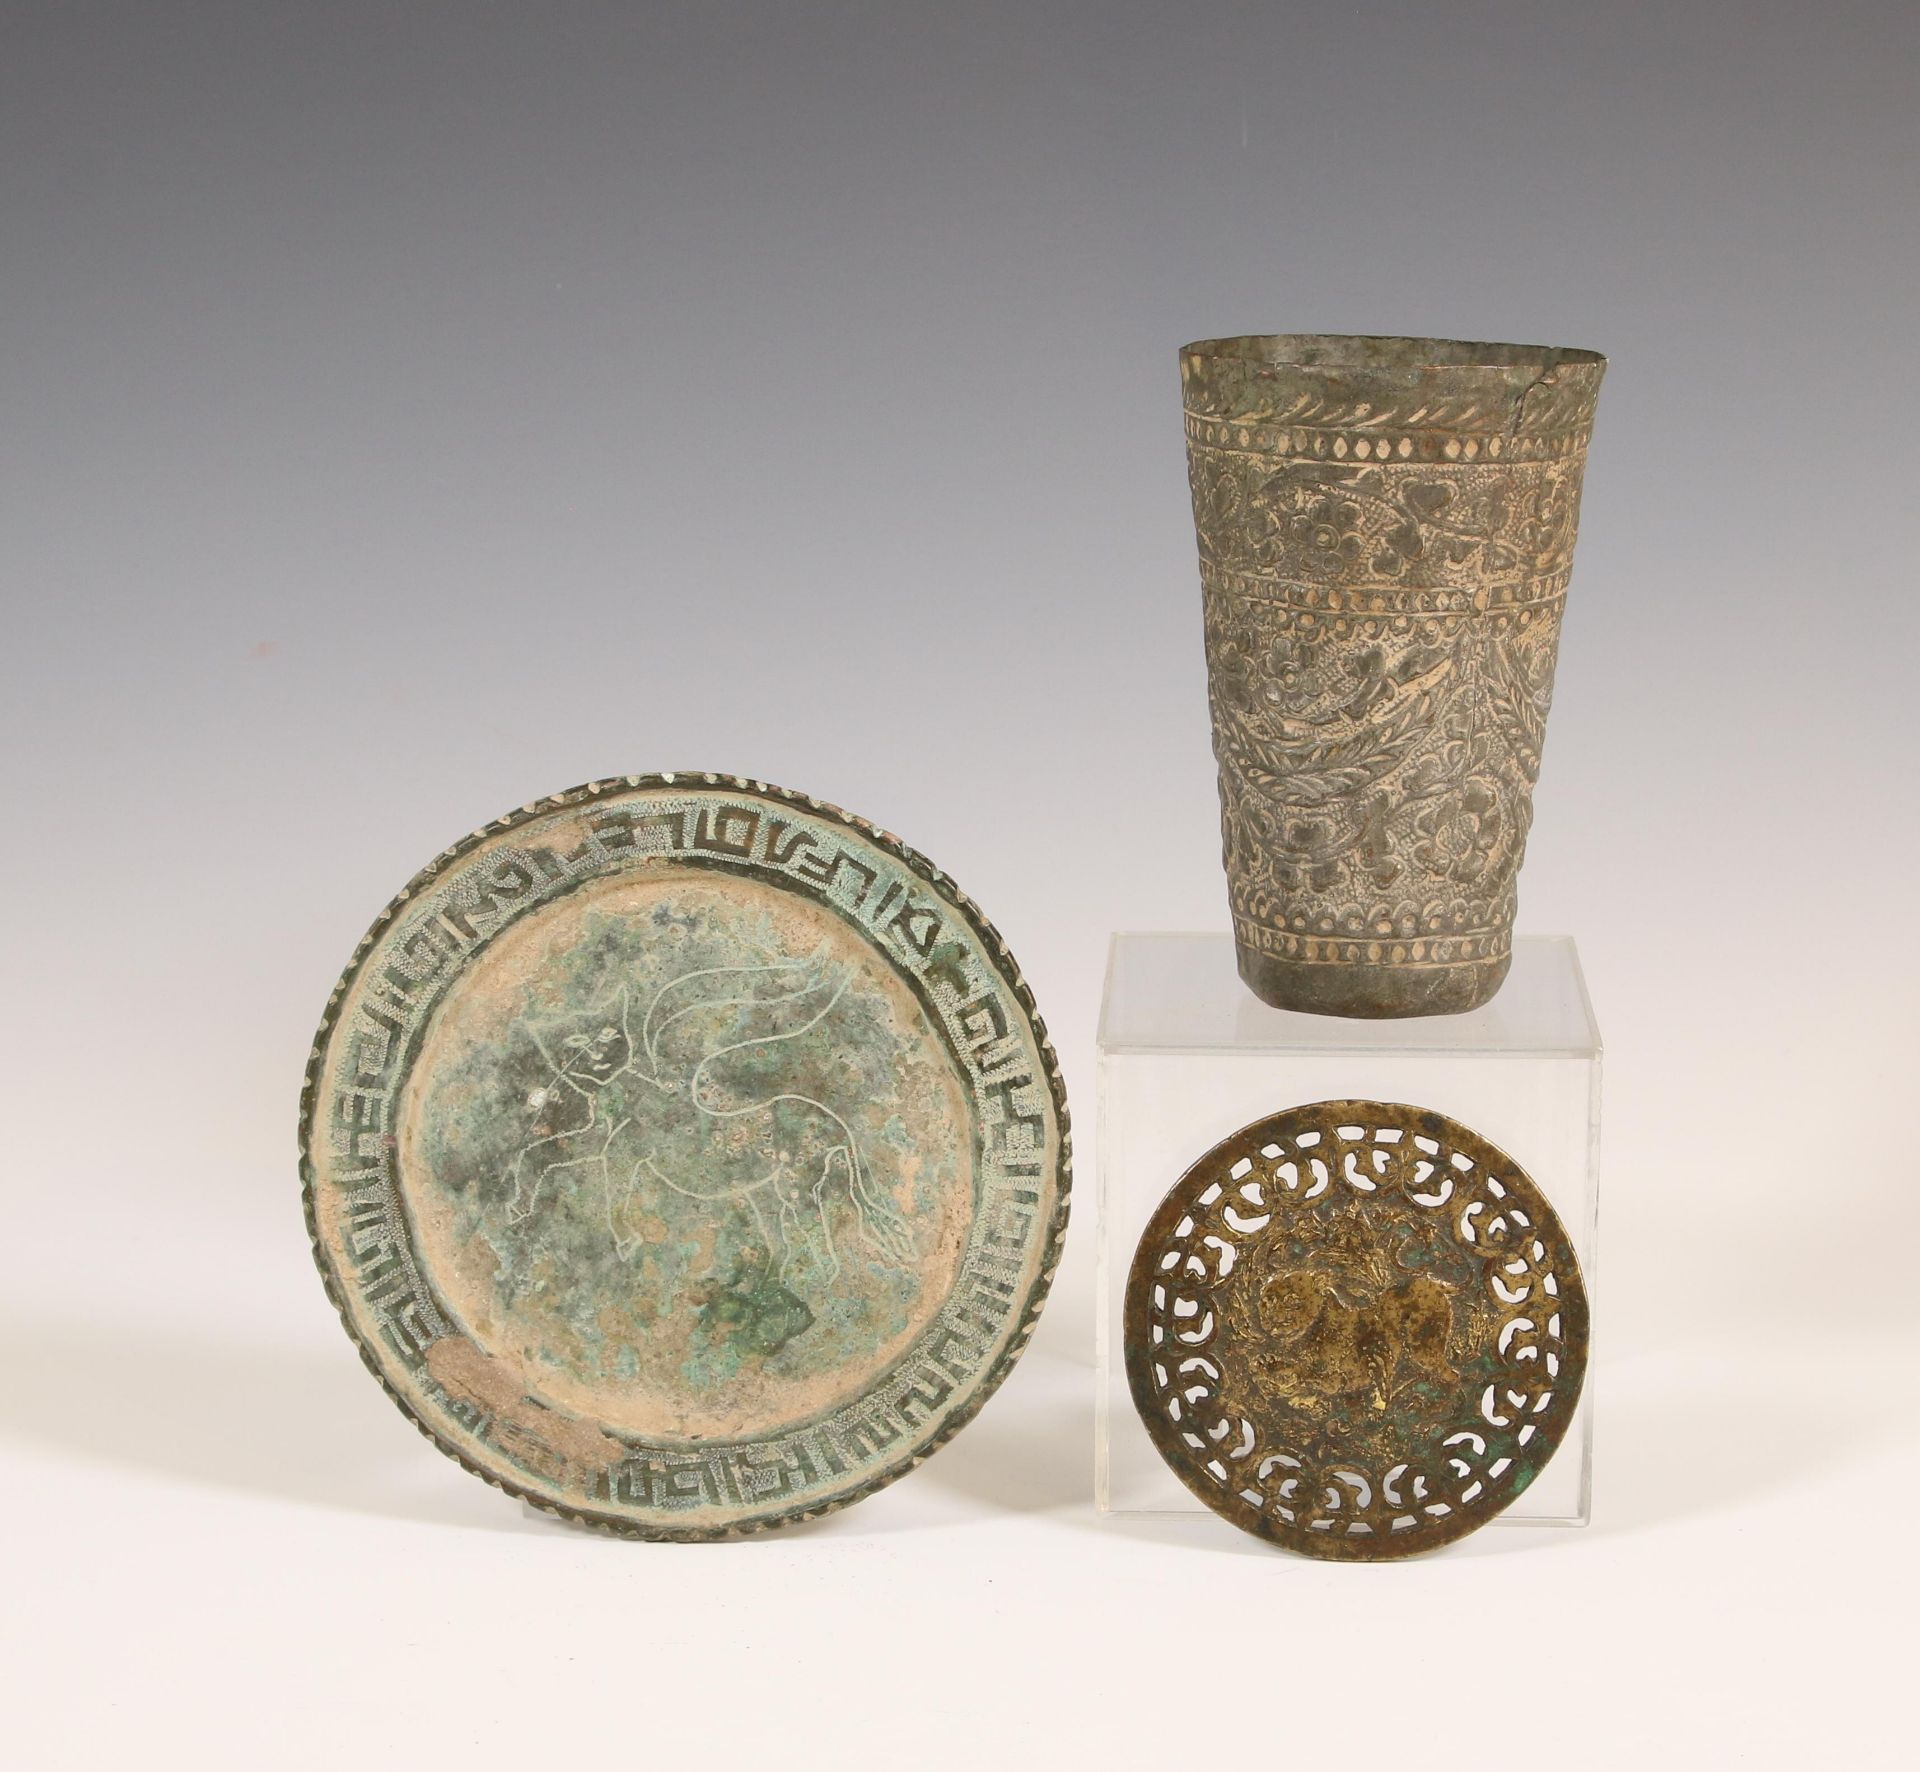 Persia, a bronze round open worked panel, a bronze dish and a metal cup, 17th-19th century;